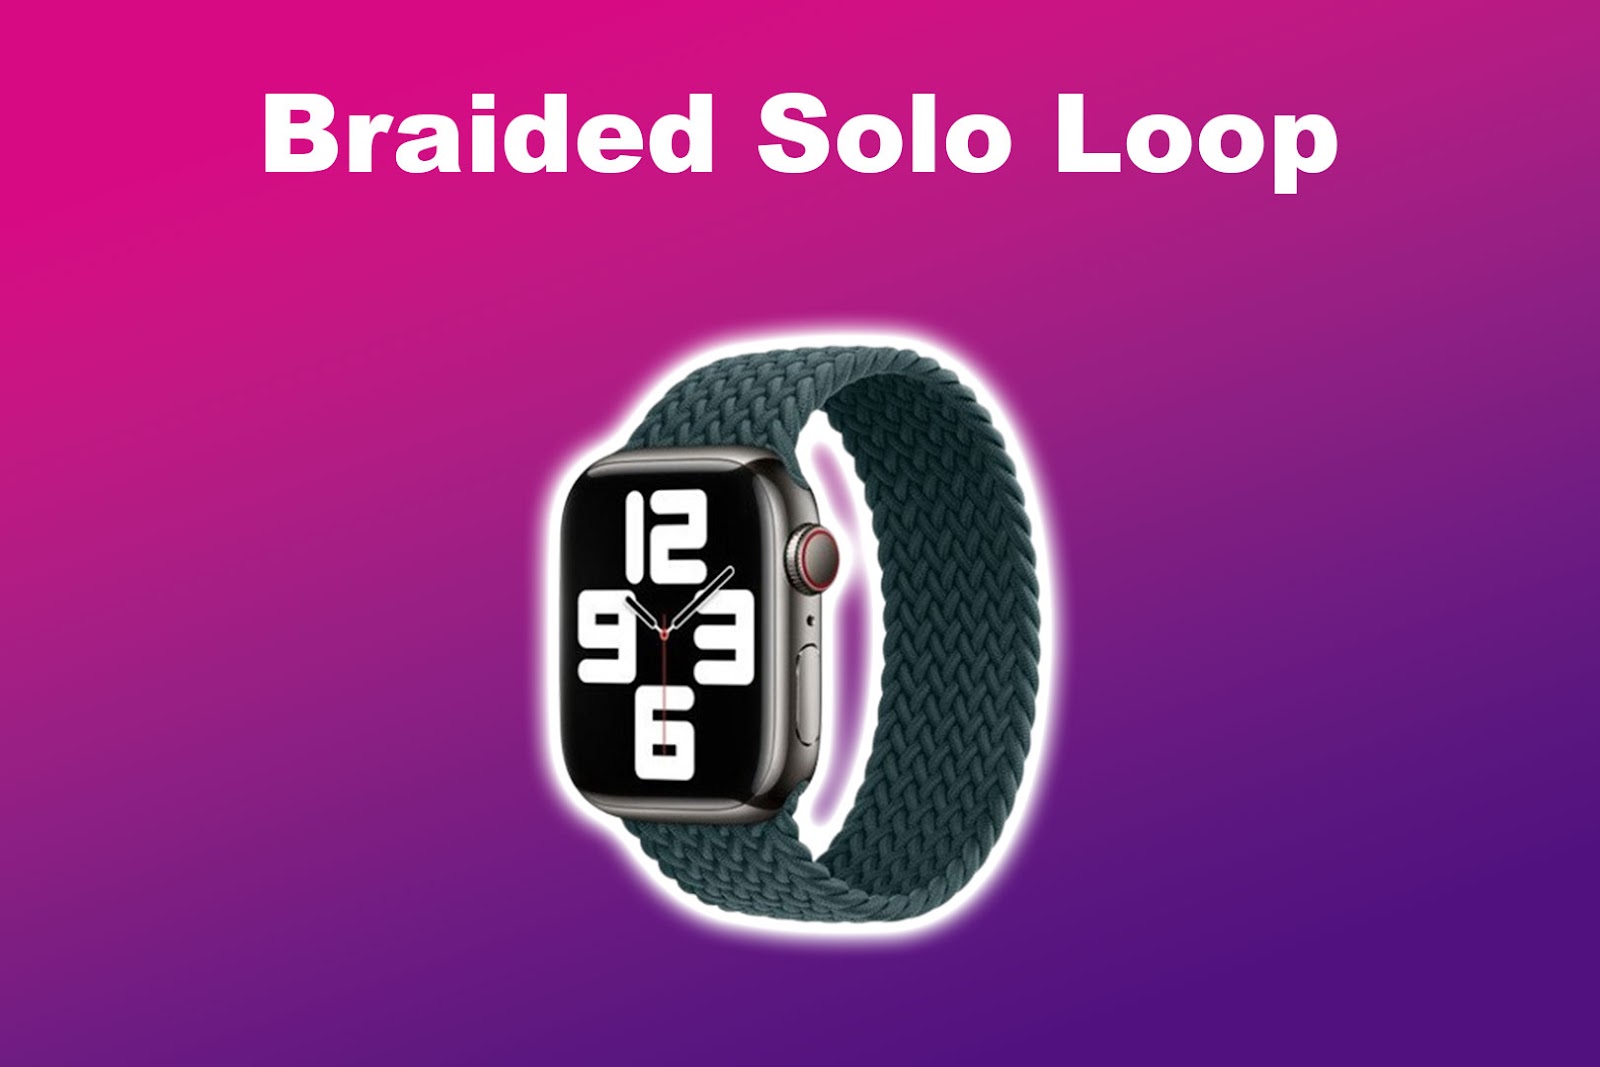 Apple Watch Band Braided Solo Loop